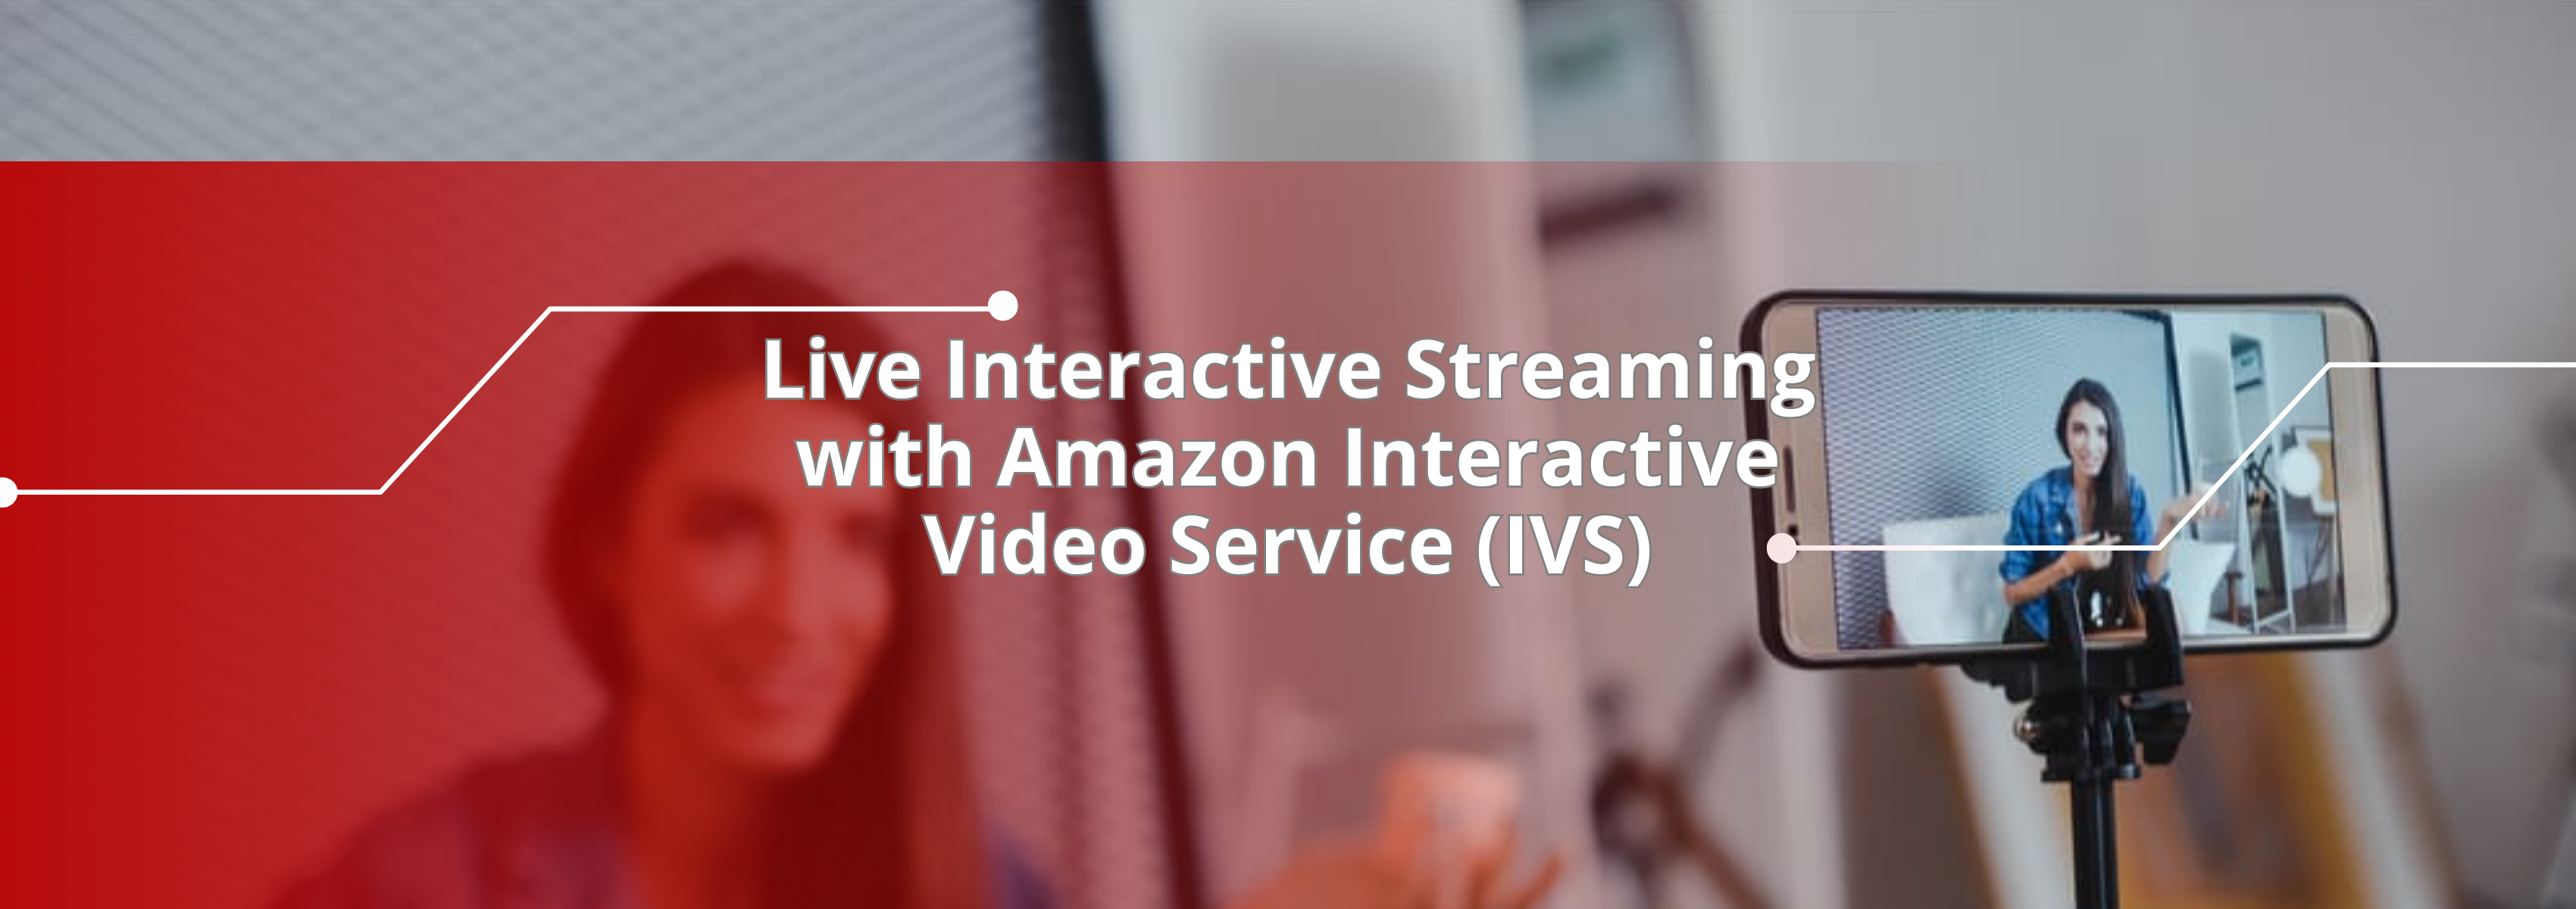 Live Interactive Streaming with Amazon Interactive Video Service (IVS)